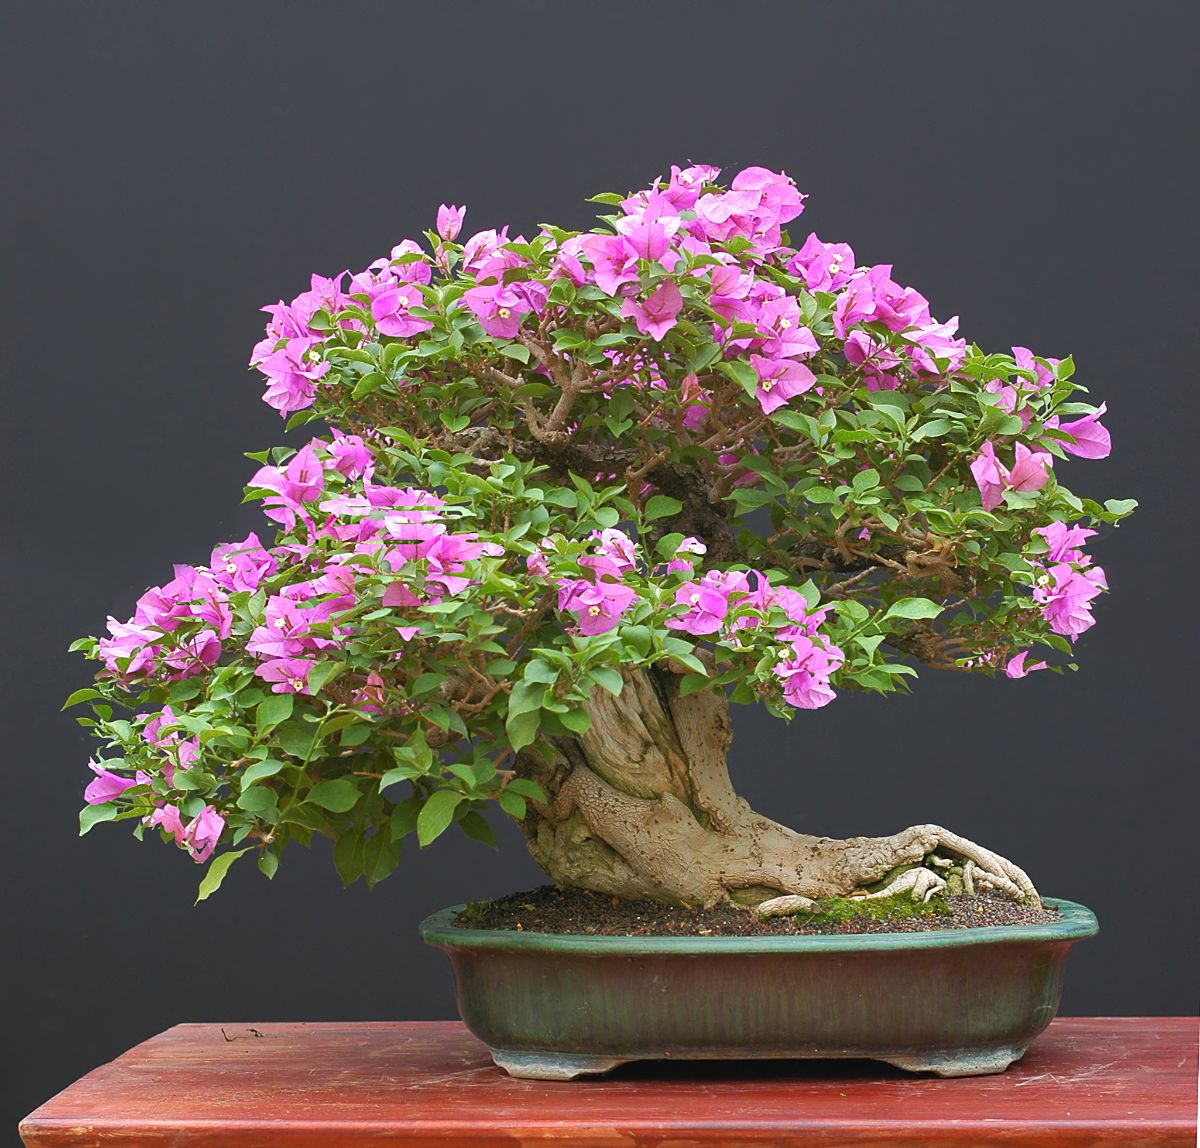 A beautiful Bougainvillea Bonsai in a pot on a table with pink flowers.